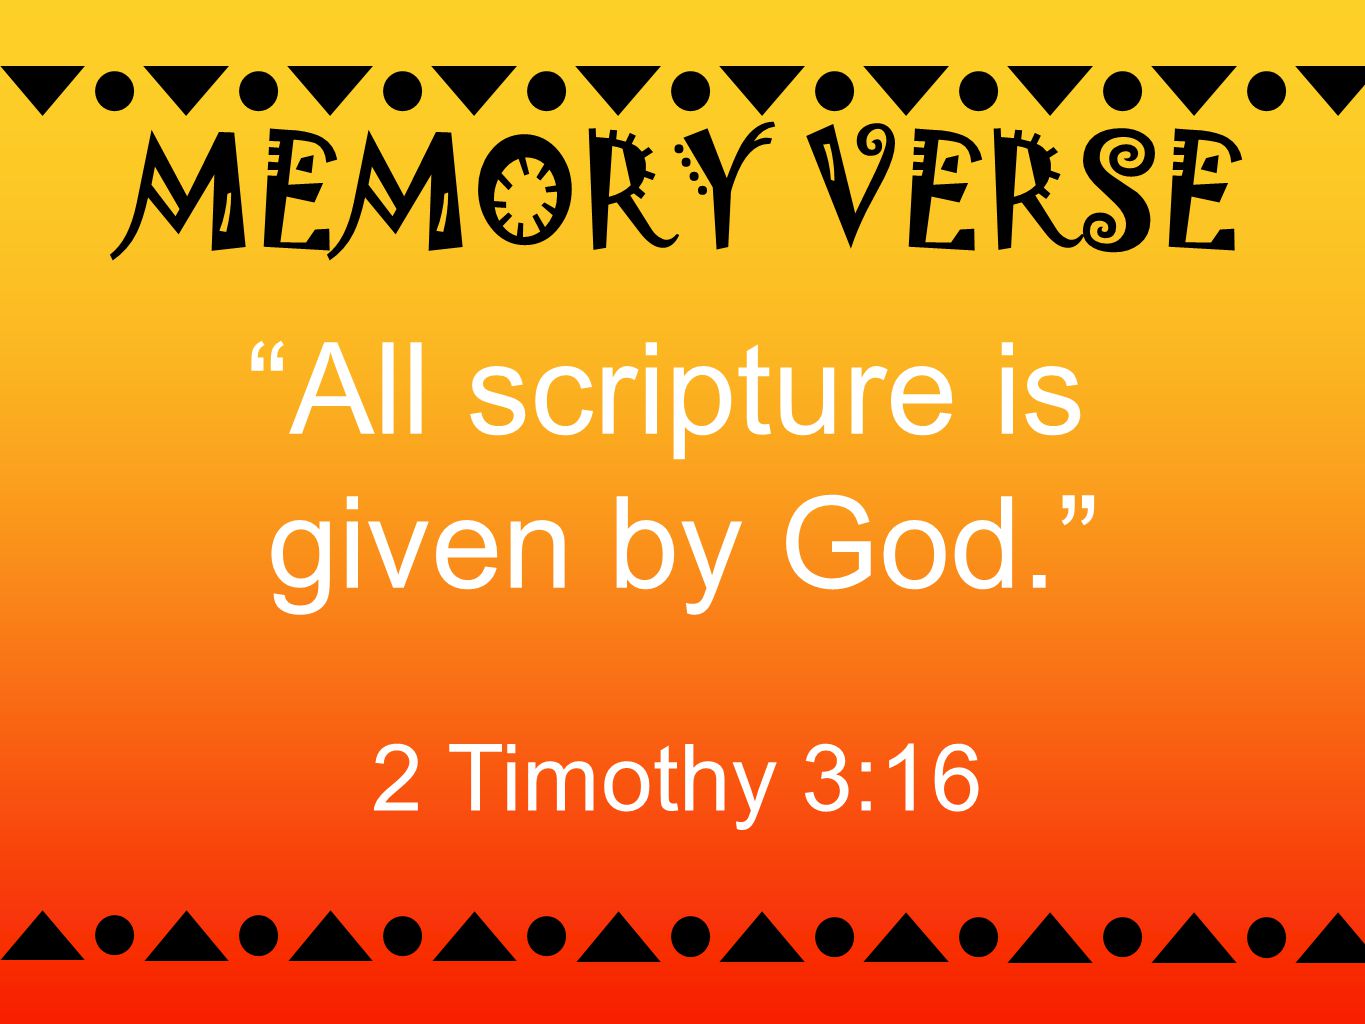 MEMORY VERSE All scripture is given by God. 2 Timothy 3:16